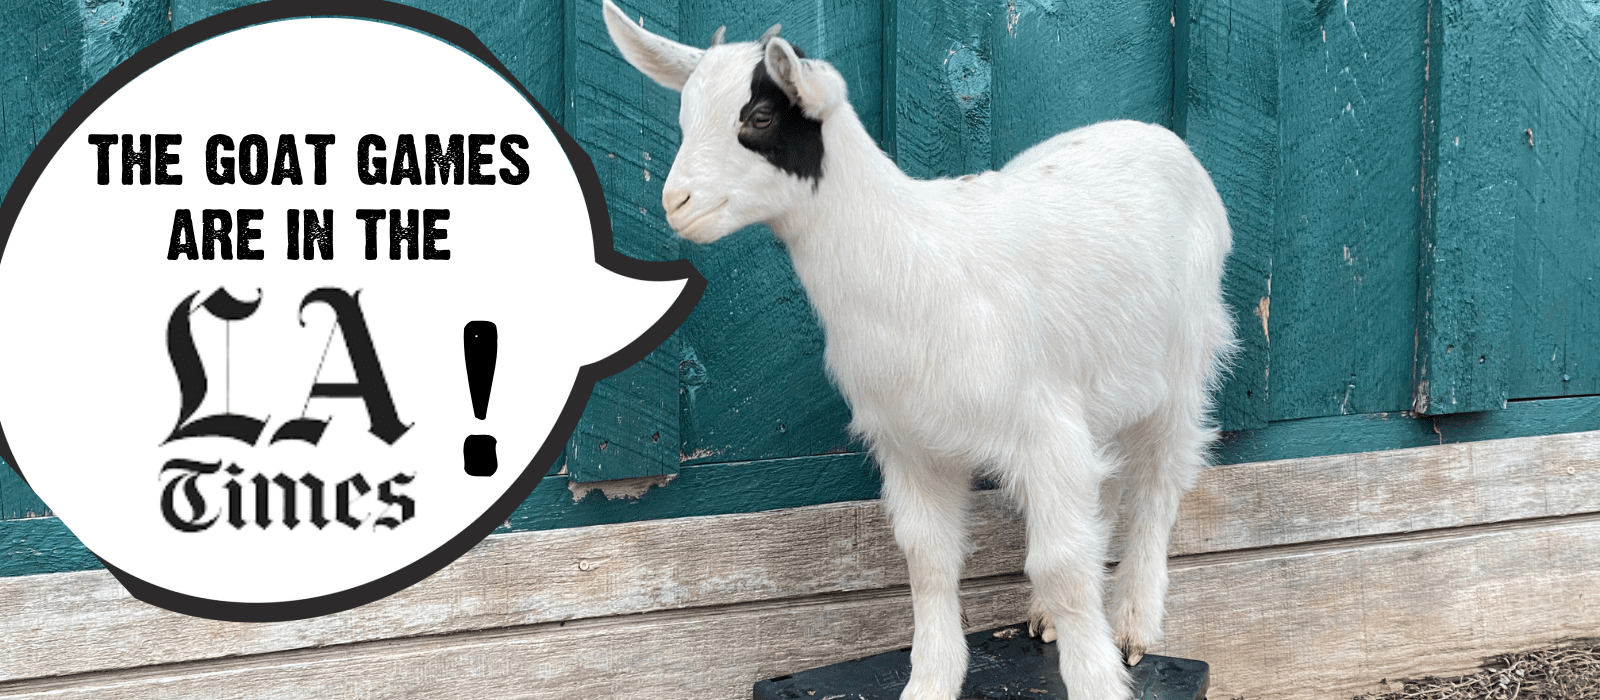 Have You Read The Latest Goat Games News?!